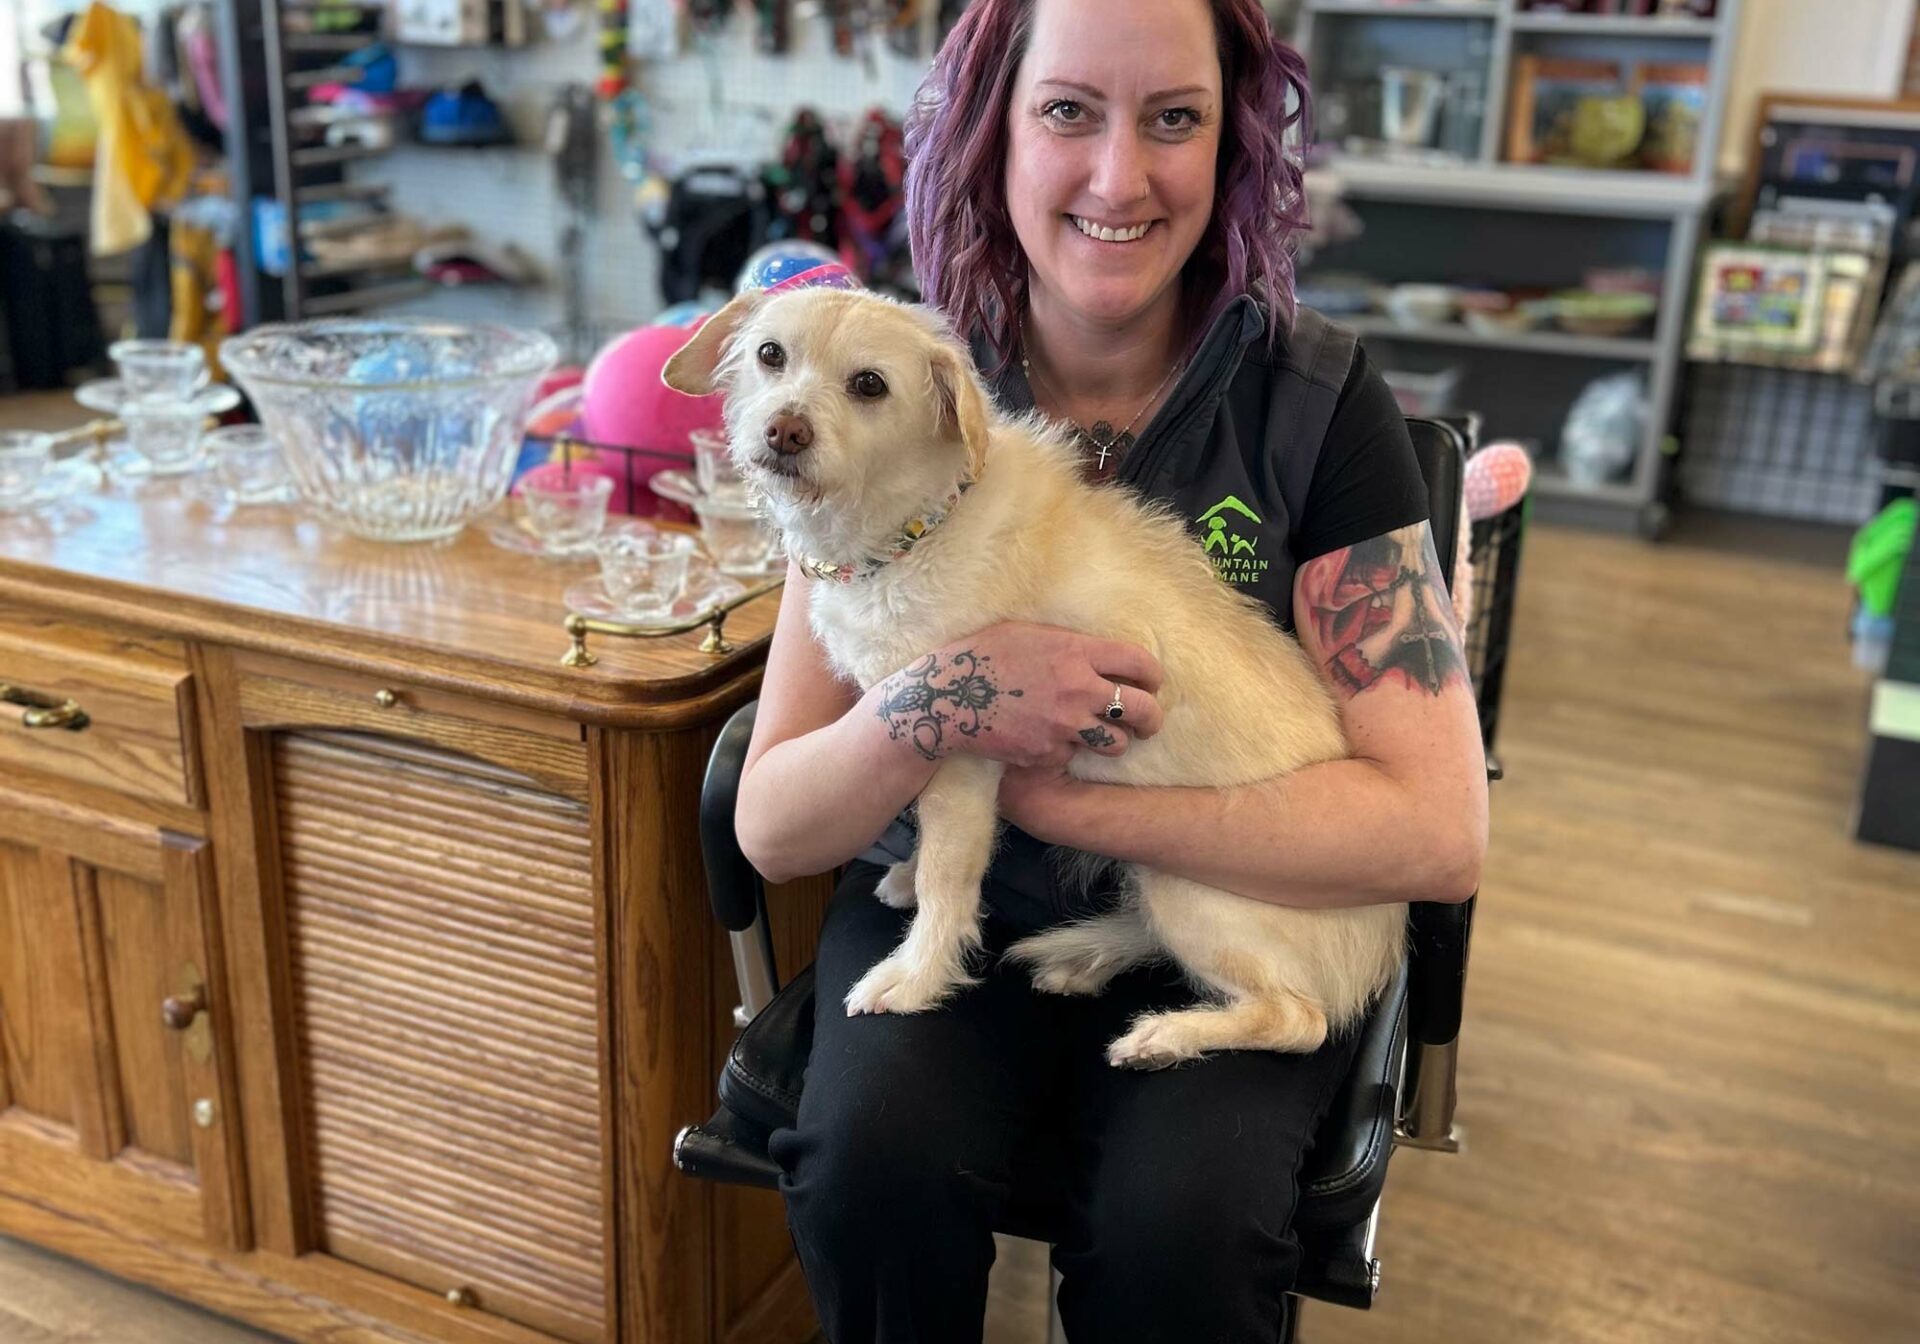 The Barkin' Thrift store employee with a scruffy dog sitting on her lap